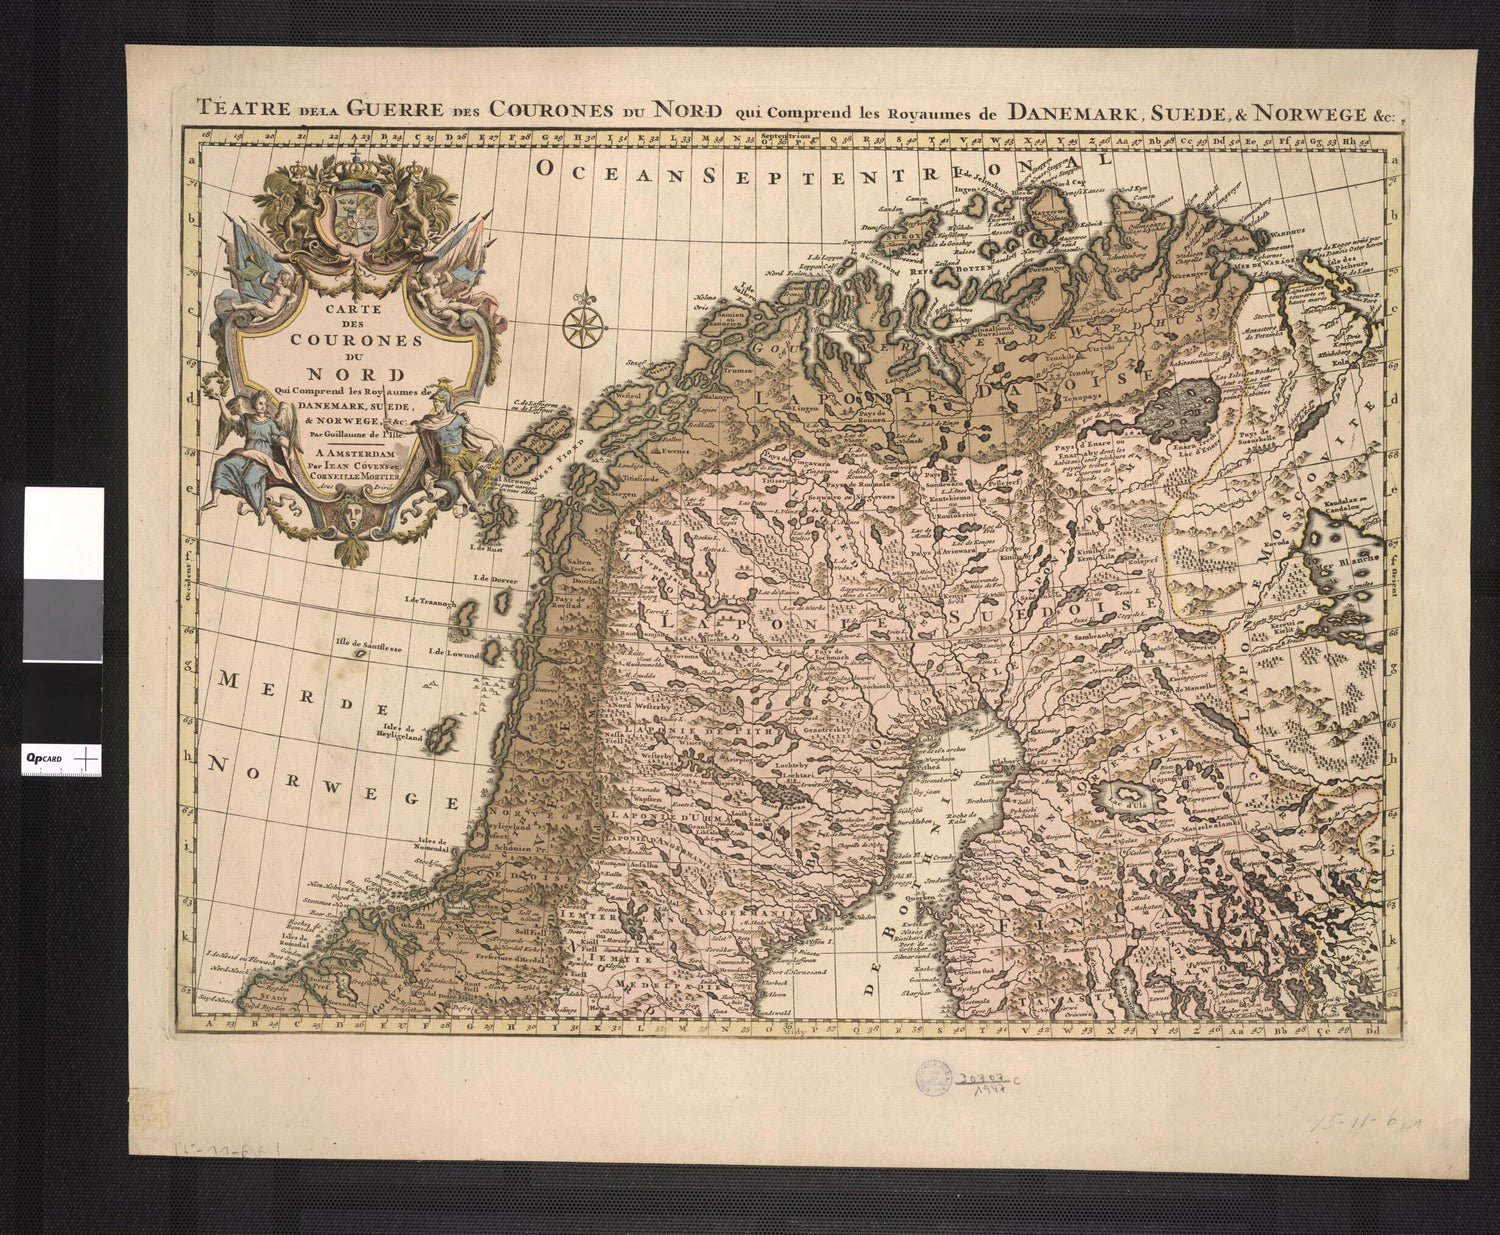 This old map of Map of the Northern Realms Including the Kingdoms of Denmark, Sweden, Norway. (Carte Des Courones Du Nord Qui Comprend Les Royaumes De Danemark, Suede, &amp; Norwege) from 1700 was created by Guillaume De L&